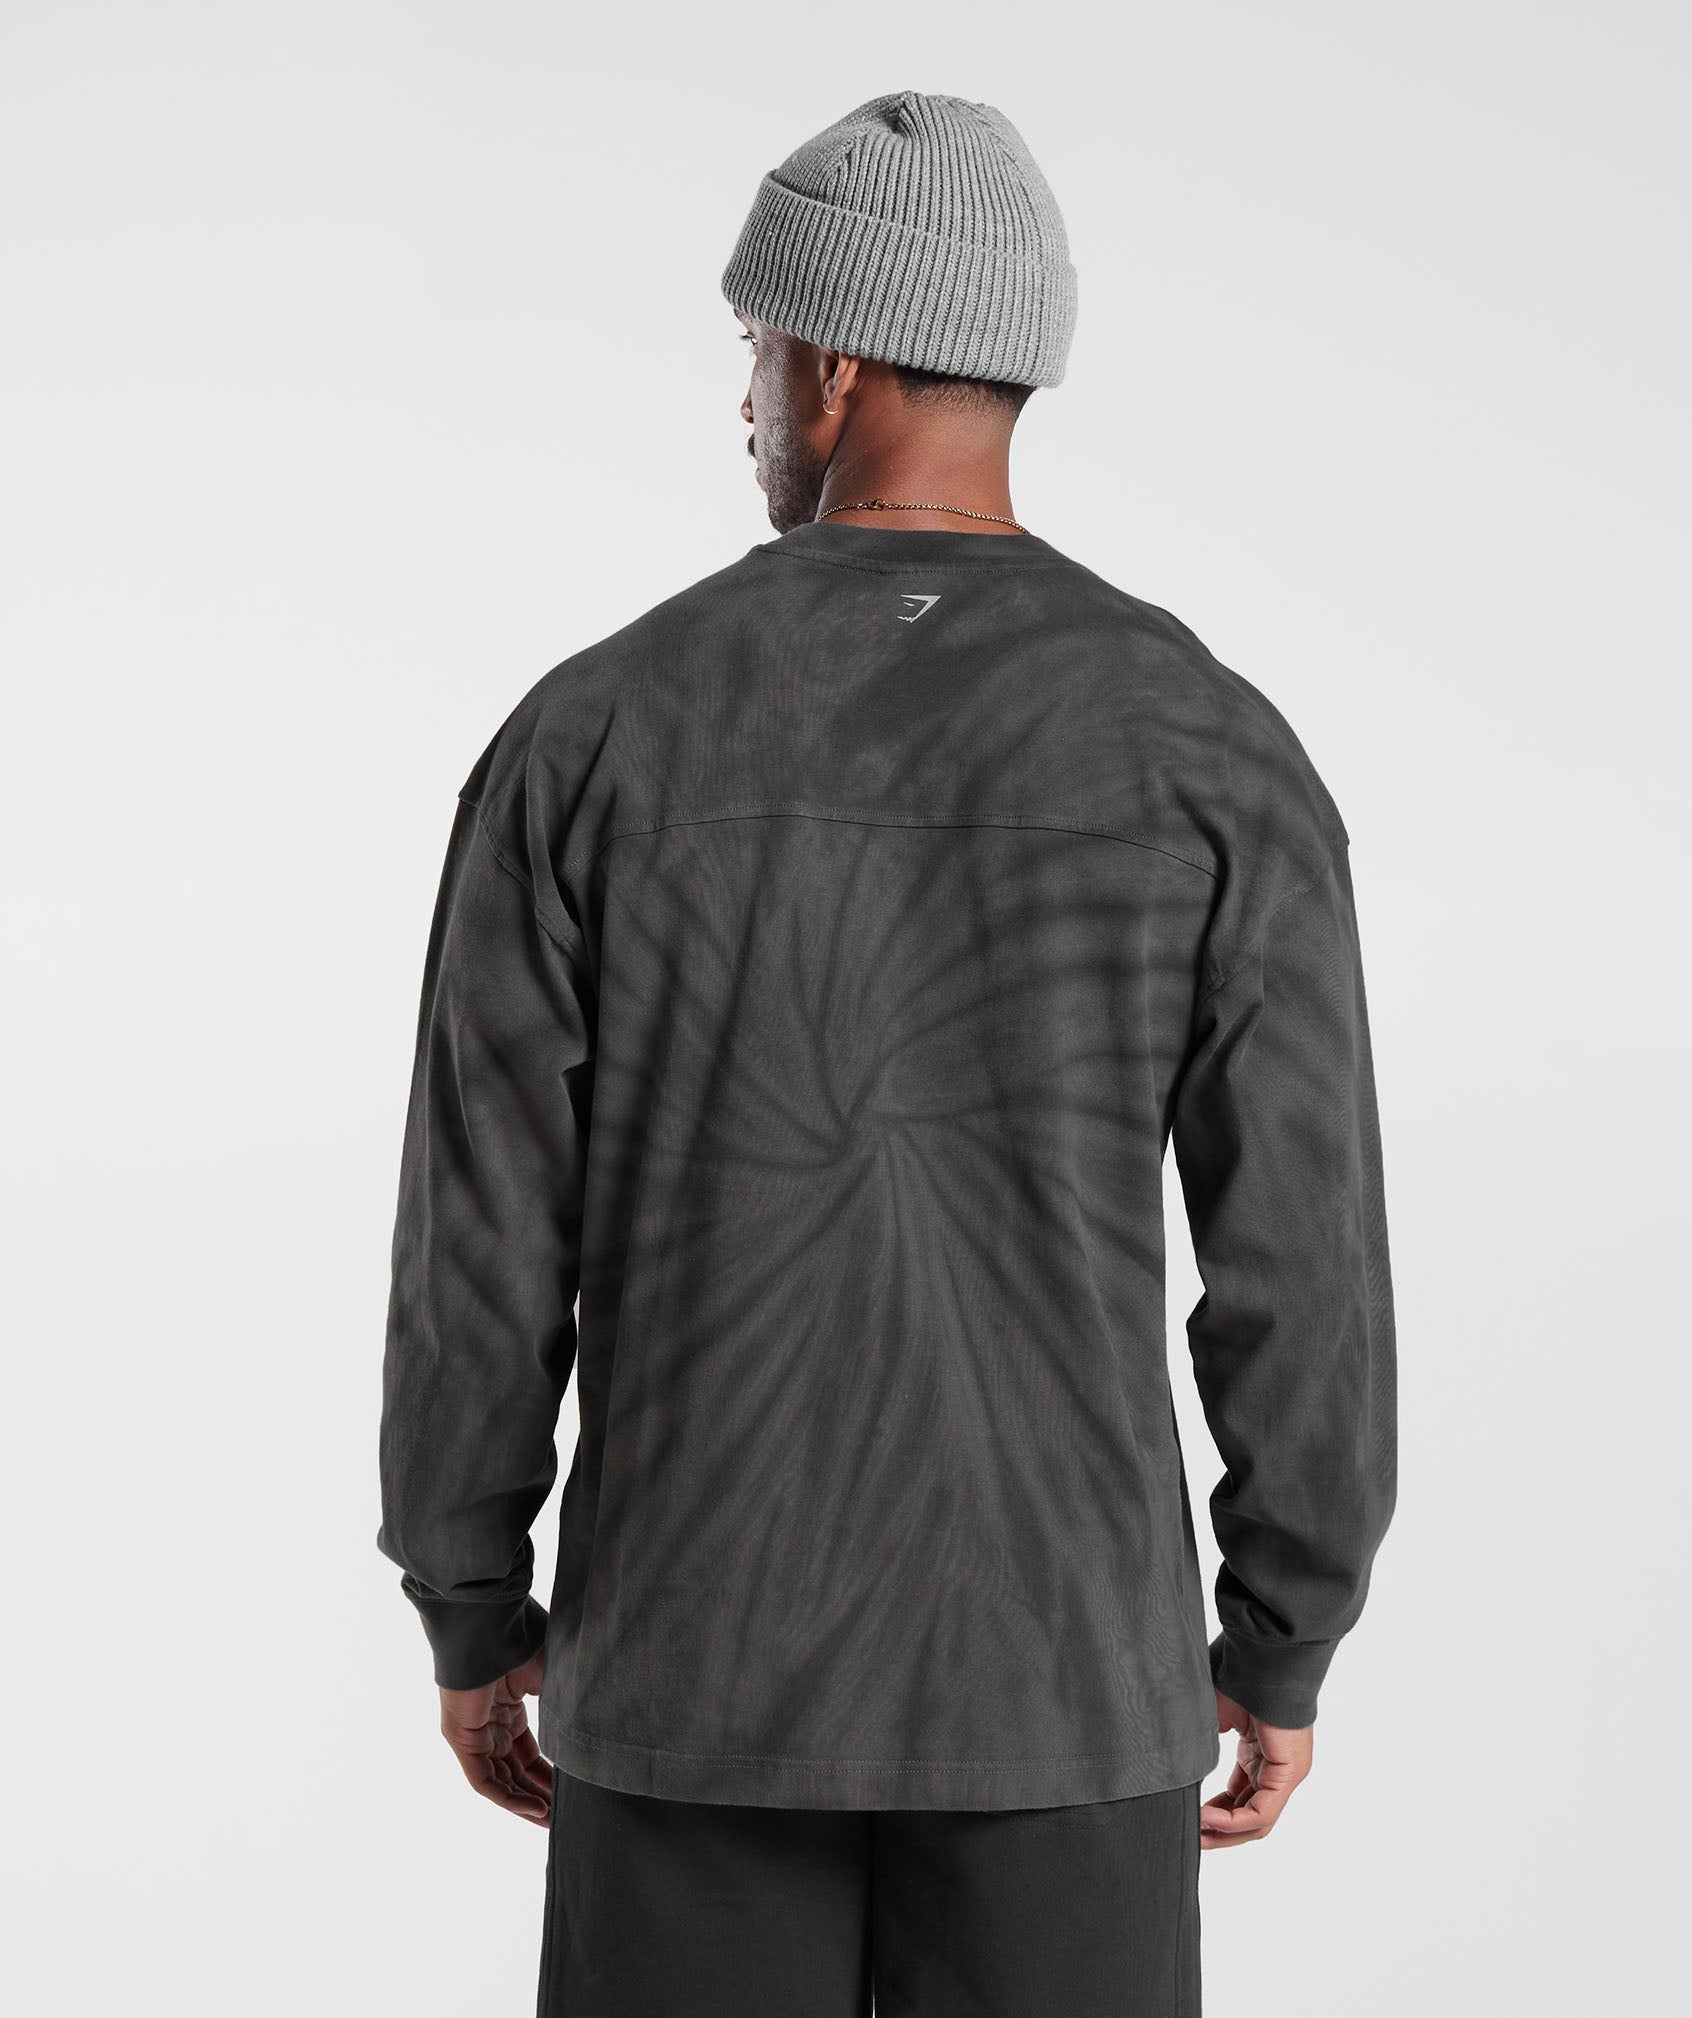 Rest Day Long Sleeve T-Shirt in Silhouette Grey/Black/Spiral Optic Wash - view 2